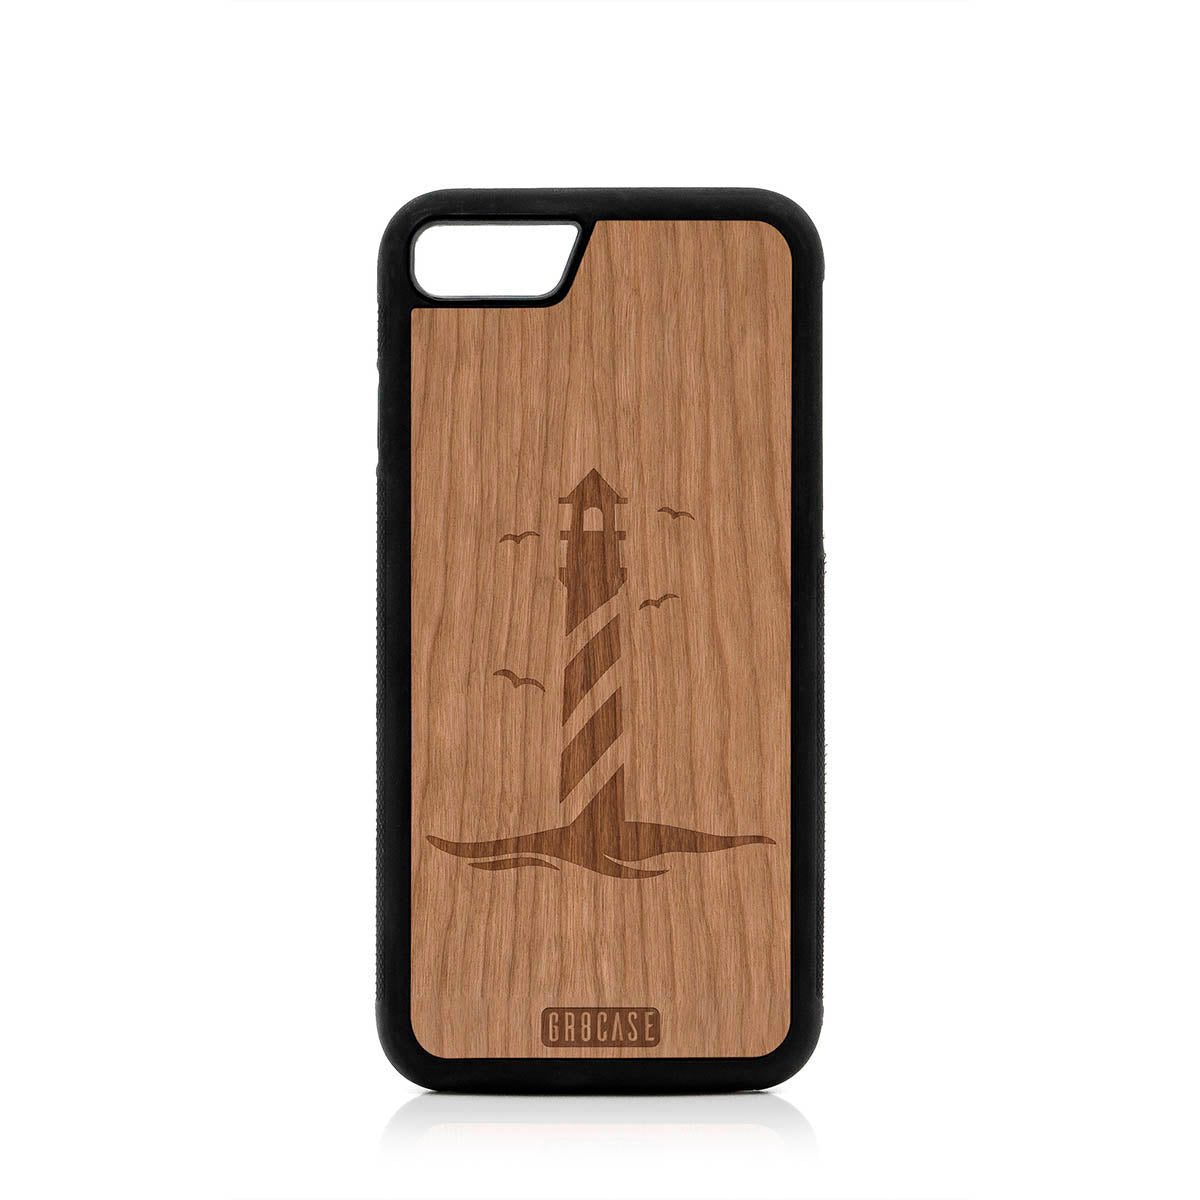 Lighthouse Design Wood Case For iPhone 7/8